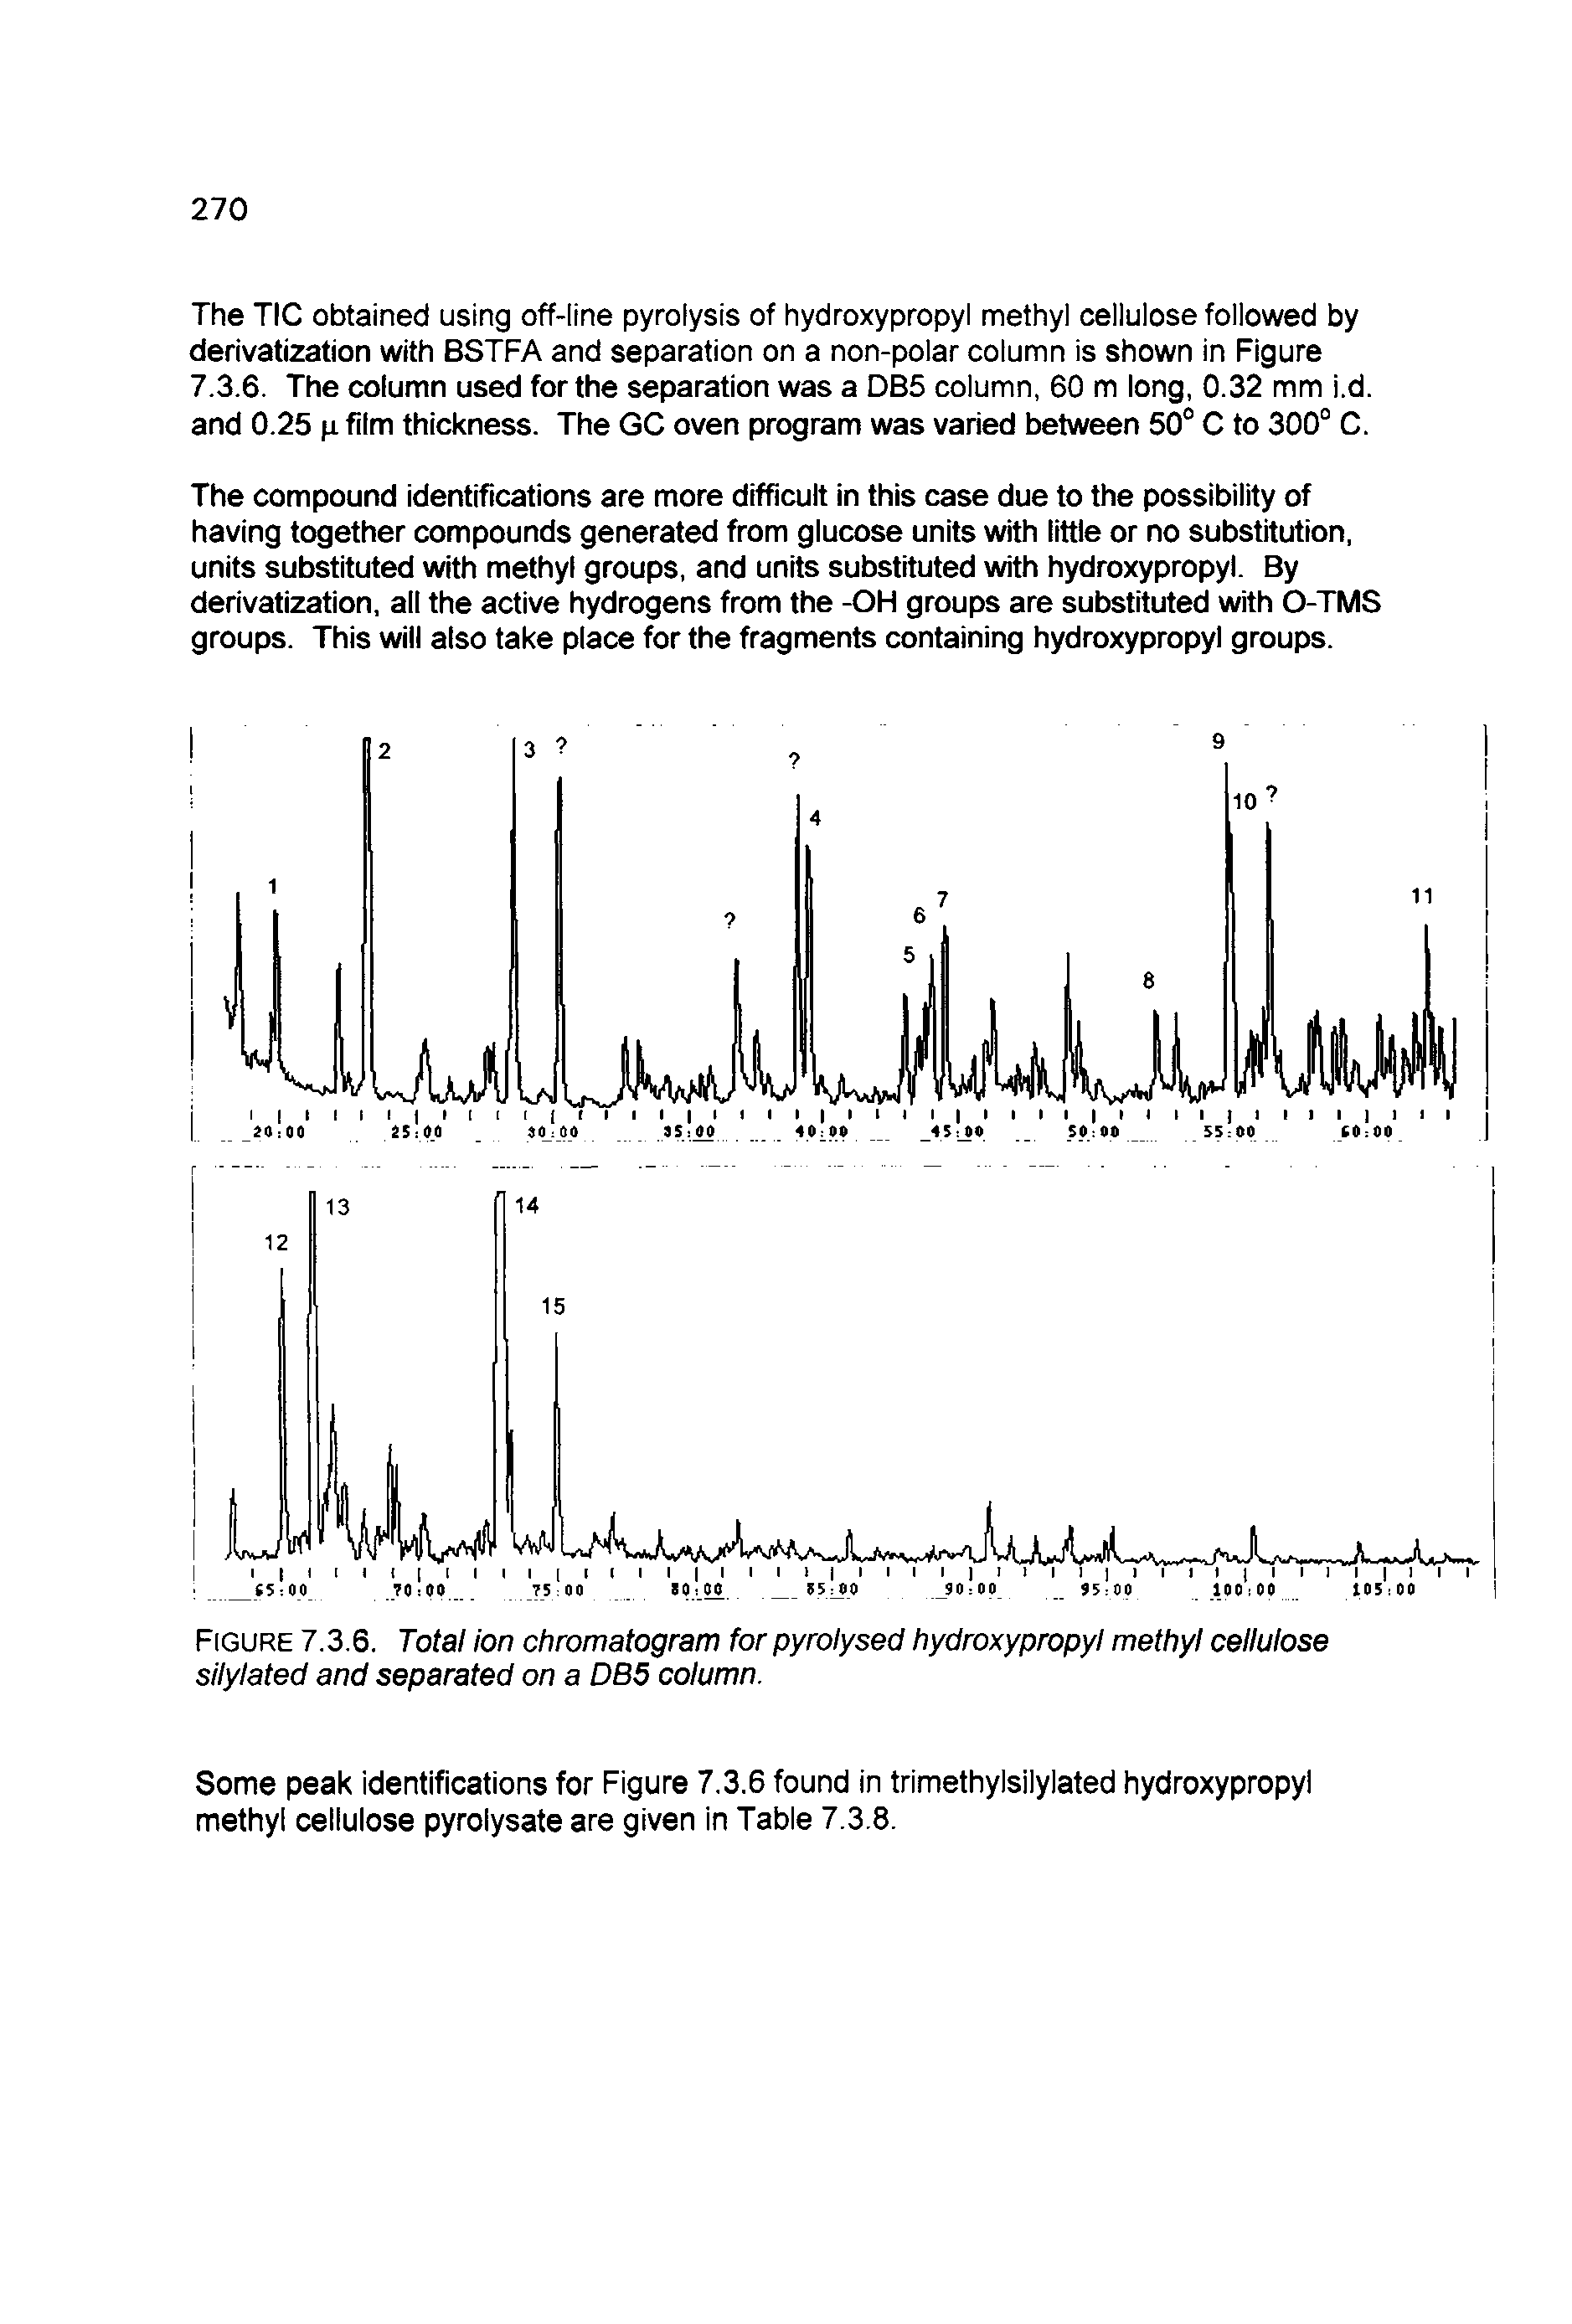 Figure 7.3.6. Total ion chromatogram for pyrofysed hydroxypropyl methyl cellulose silylated and separated on a DB5 column.